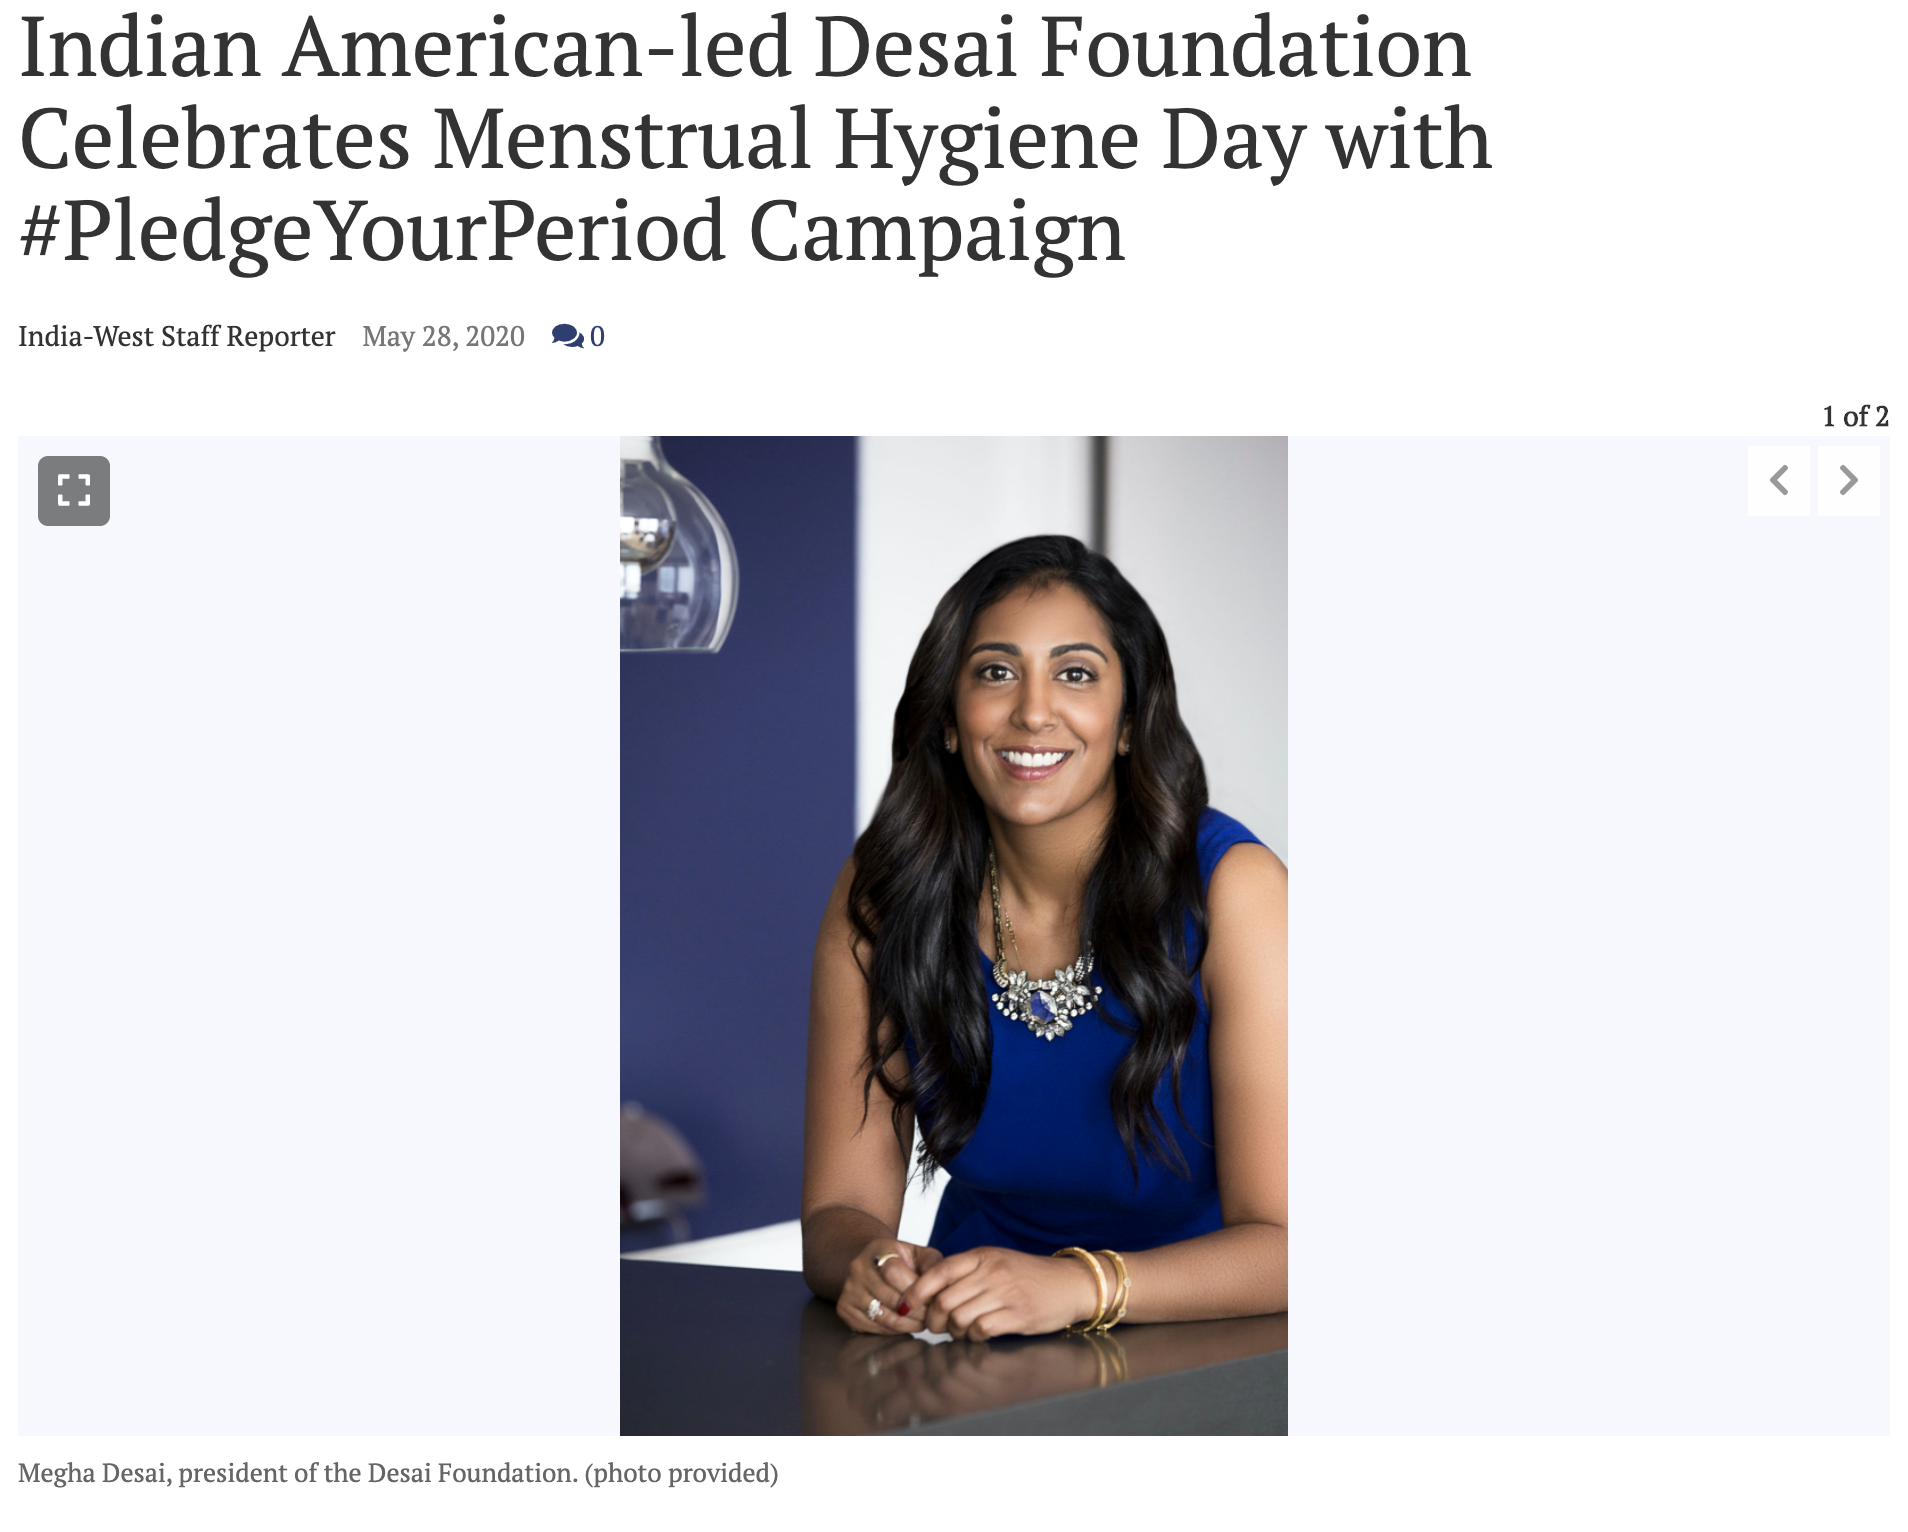 Indian American-led Desai Foundation Celebrates Menstrual Hygiene Day with #PledgeYourPeriod Campaign